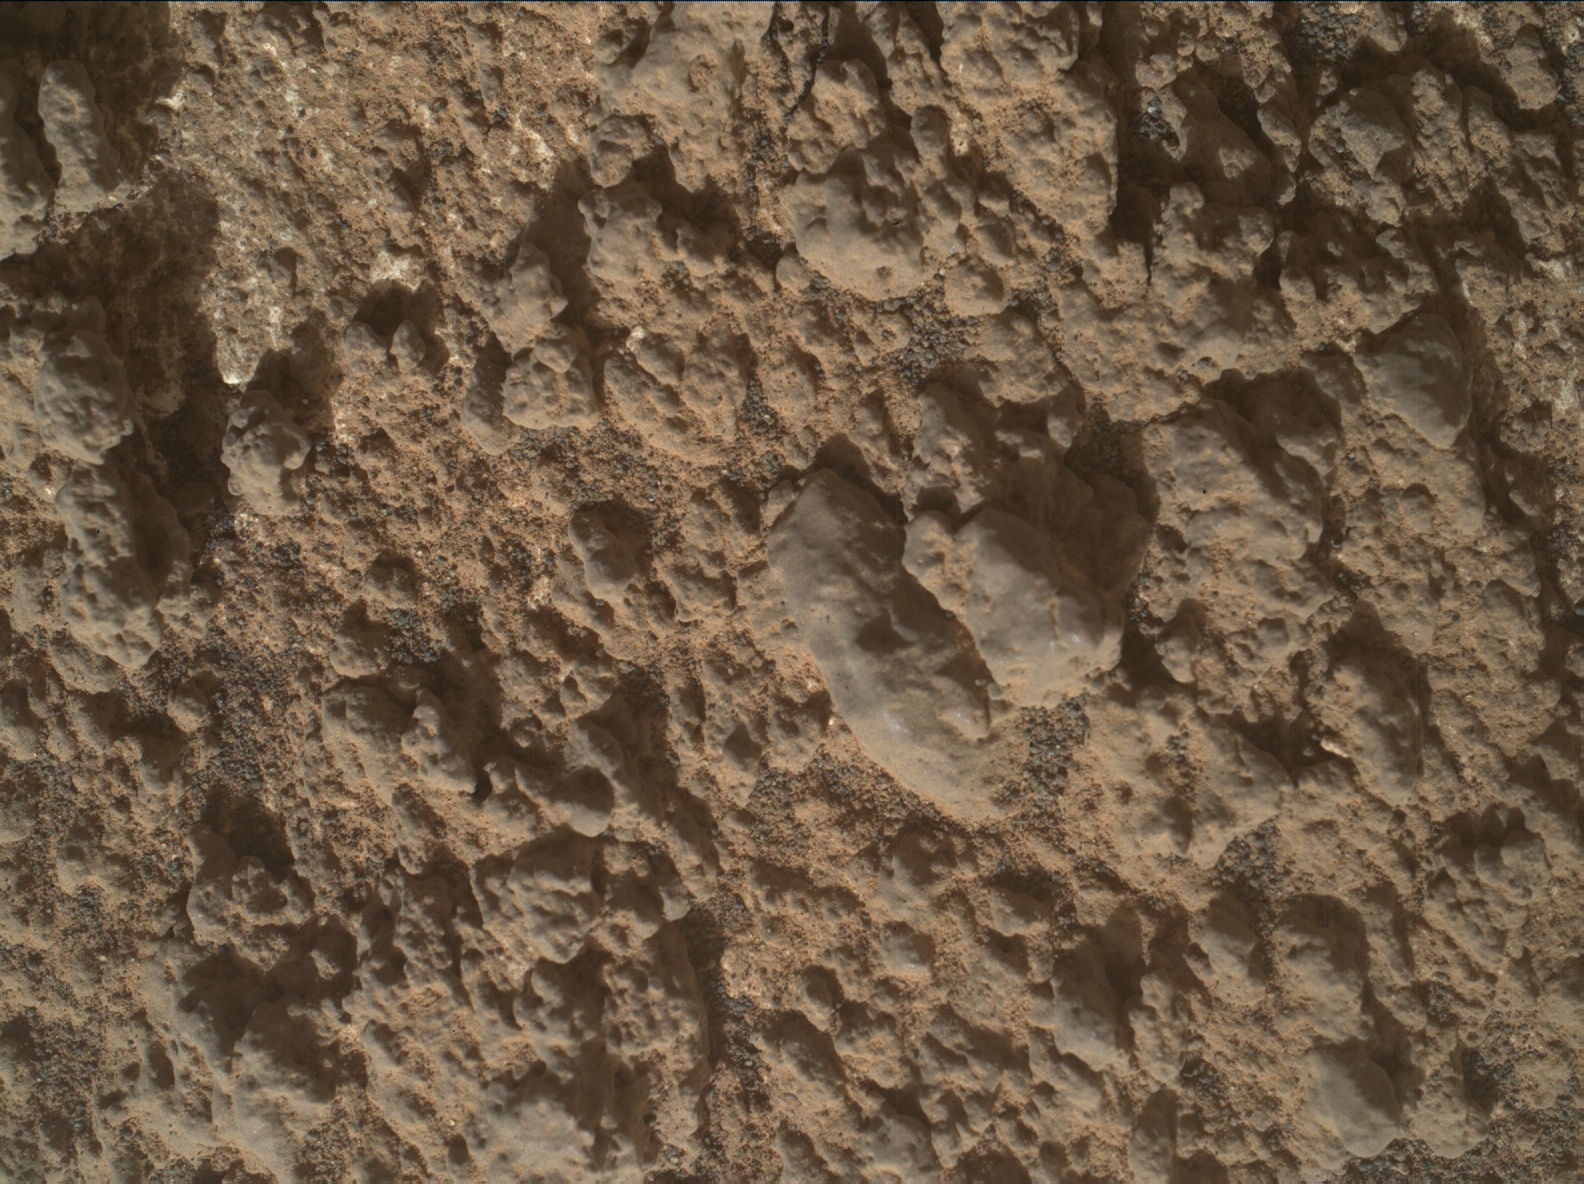 Nasa's Mars rover Curiosity acquired this image using its Mars Hand Lens Imager (MAHLI) on Sol 2928